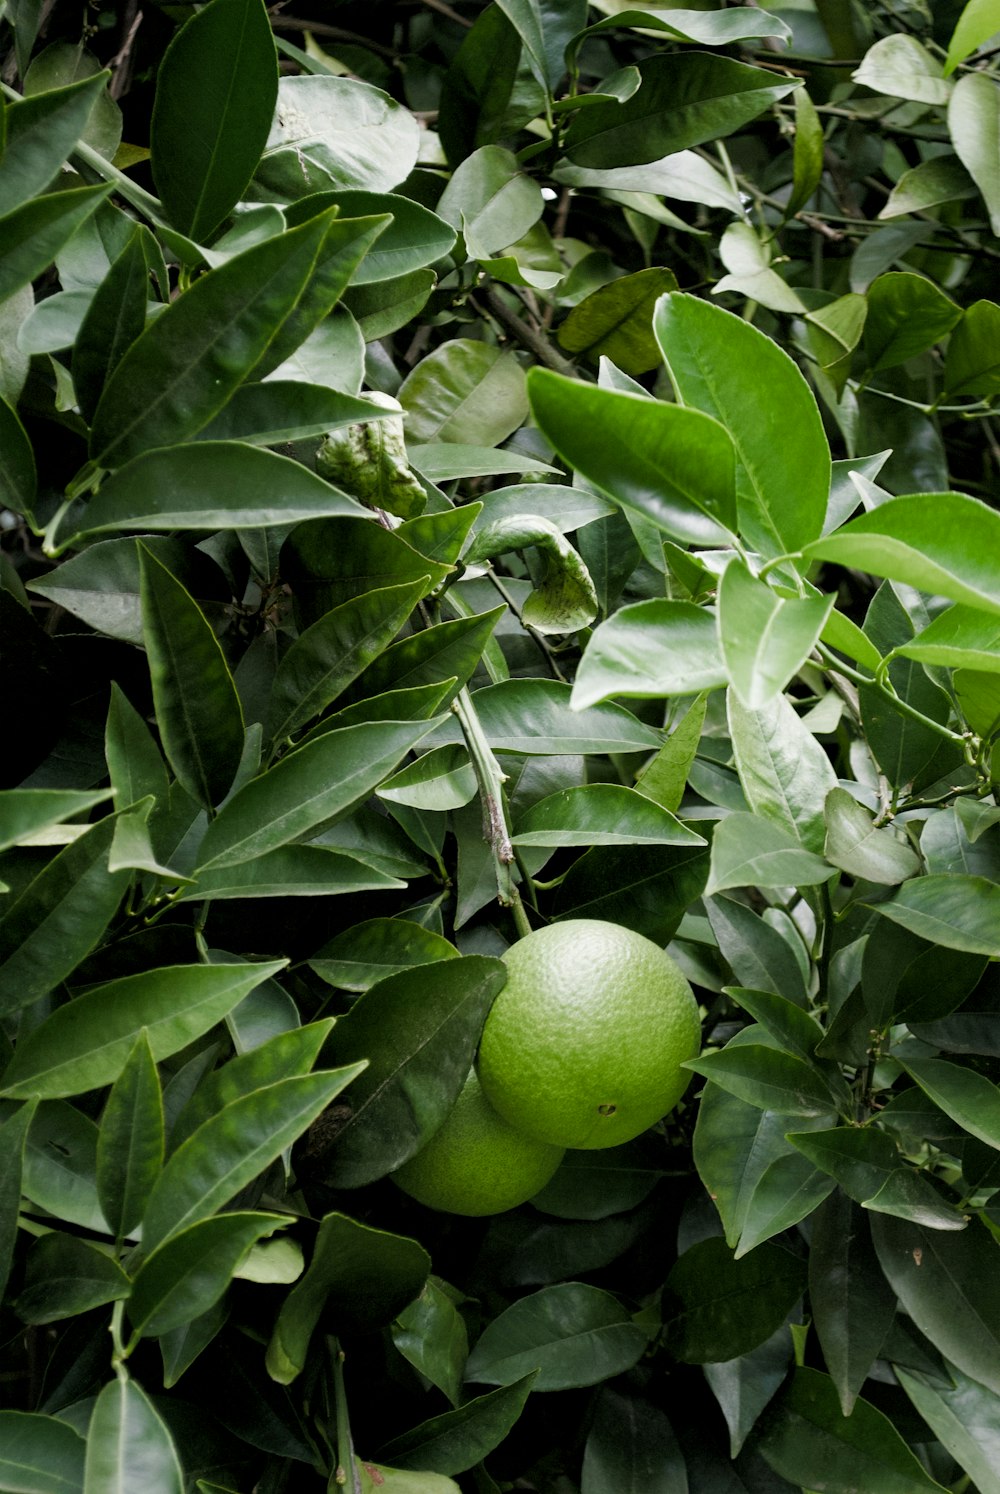 a close up of a green fruit on a tree